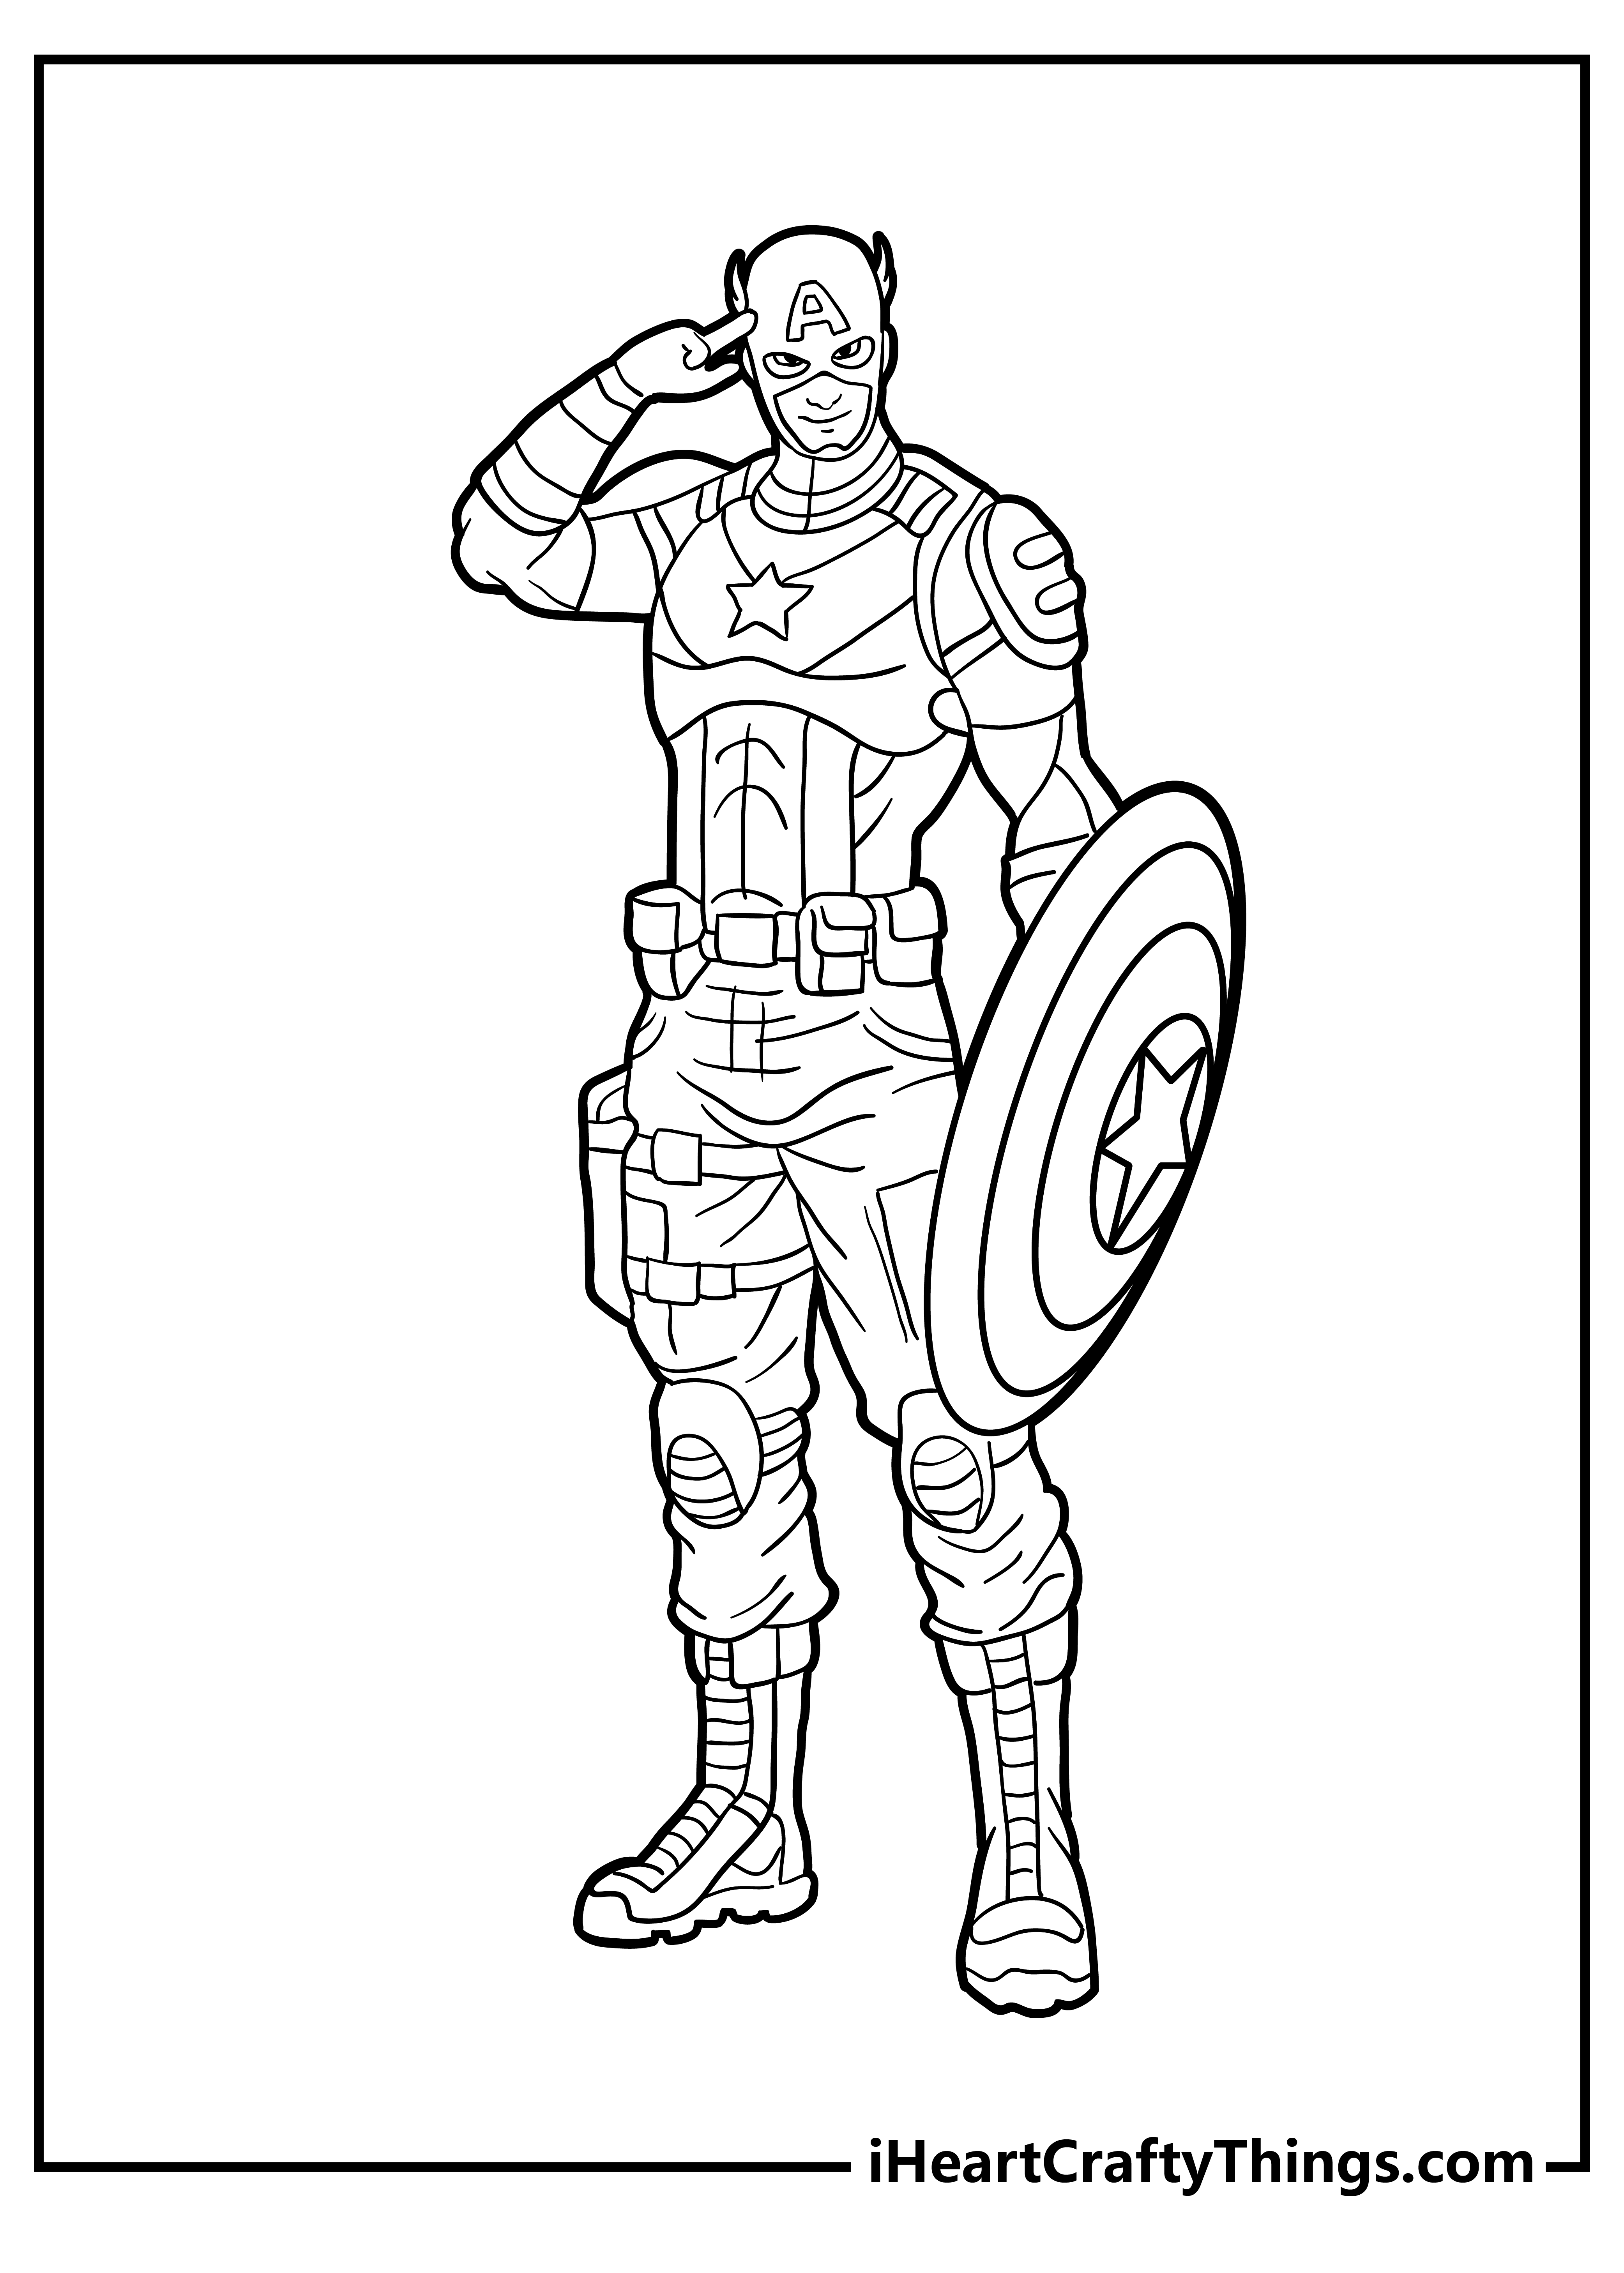 Captain America Easy Coloring Pages